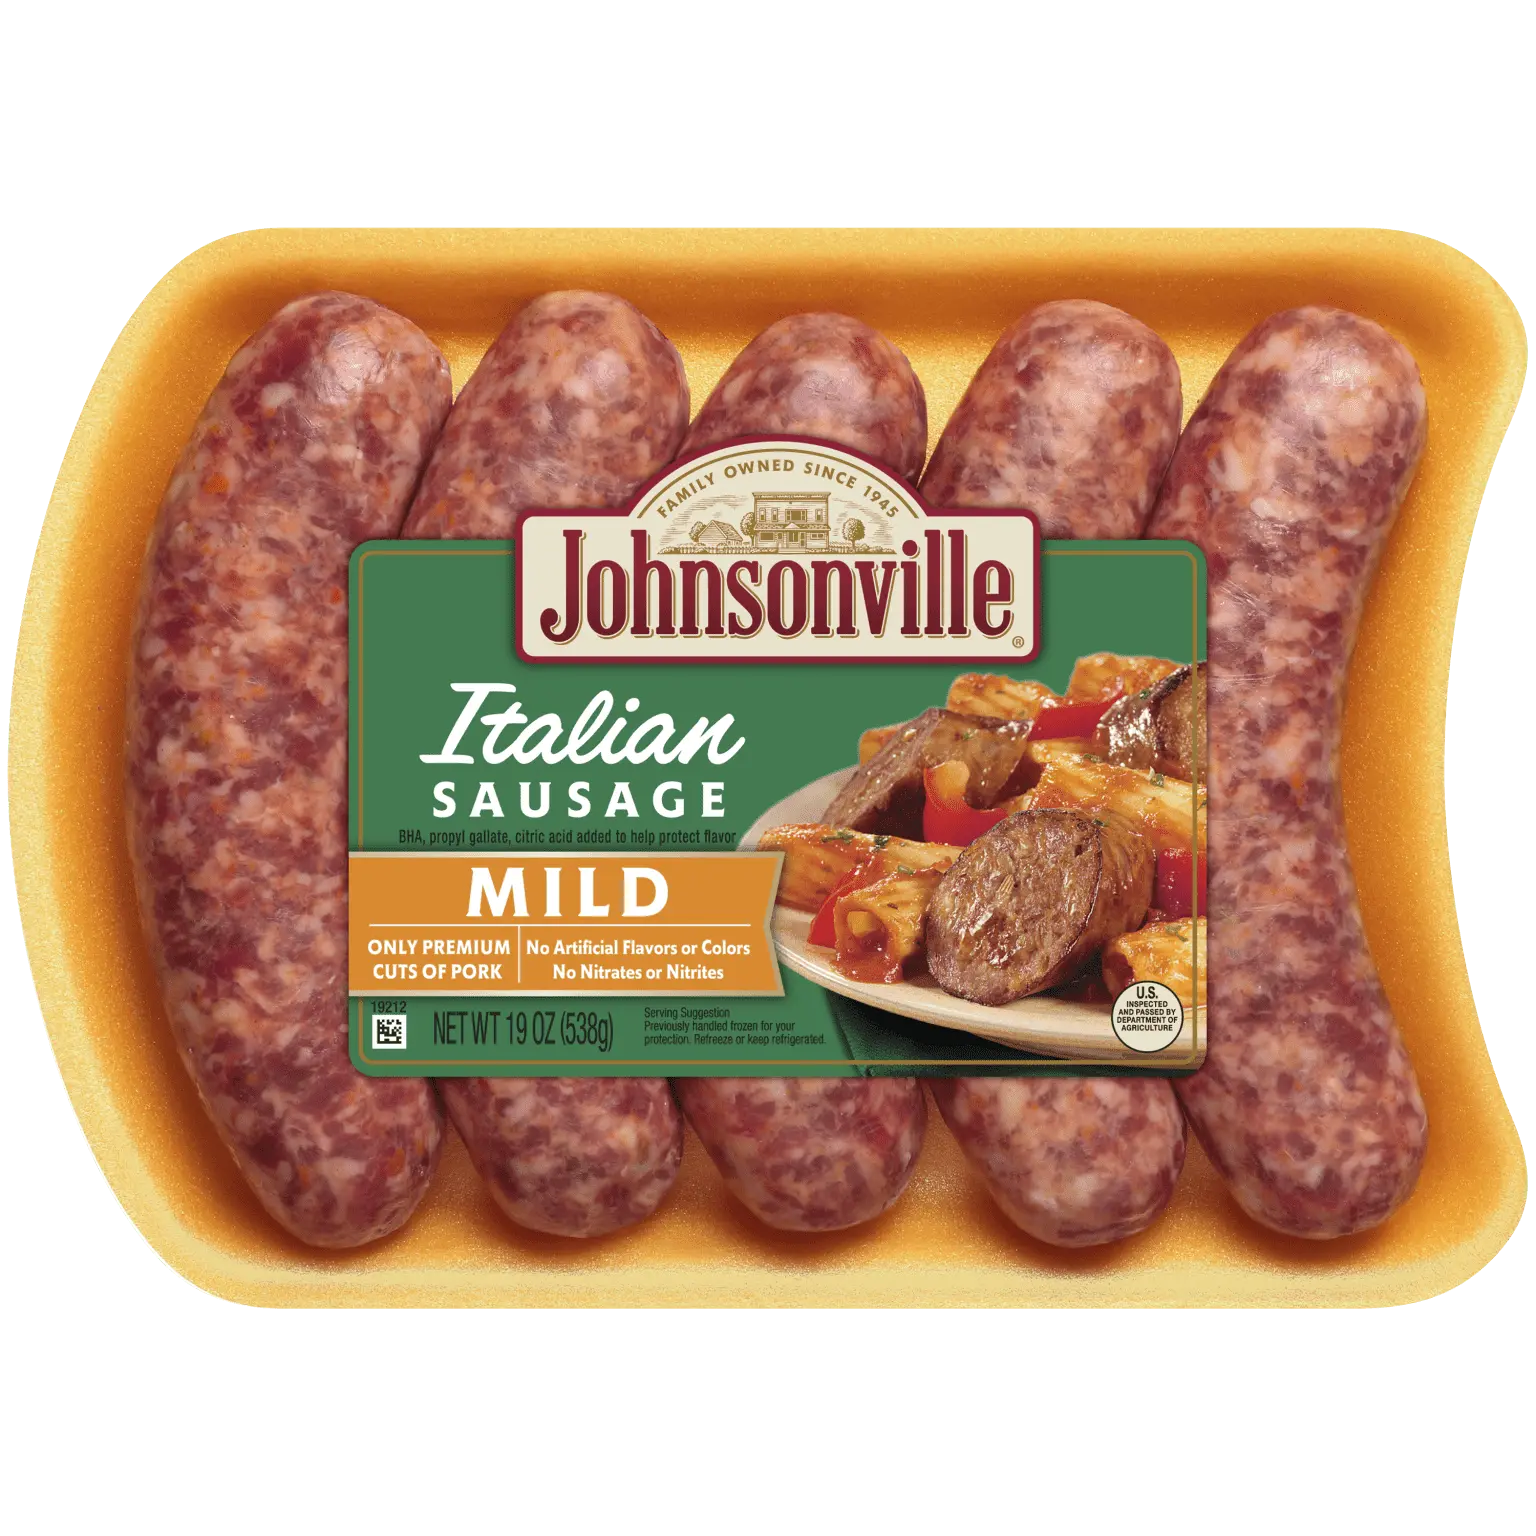 johnsonville smoked sausage - What kind of sausage is Johnsonville